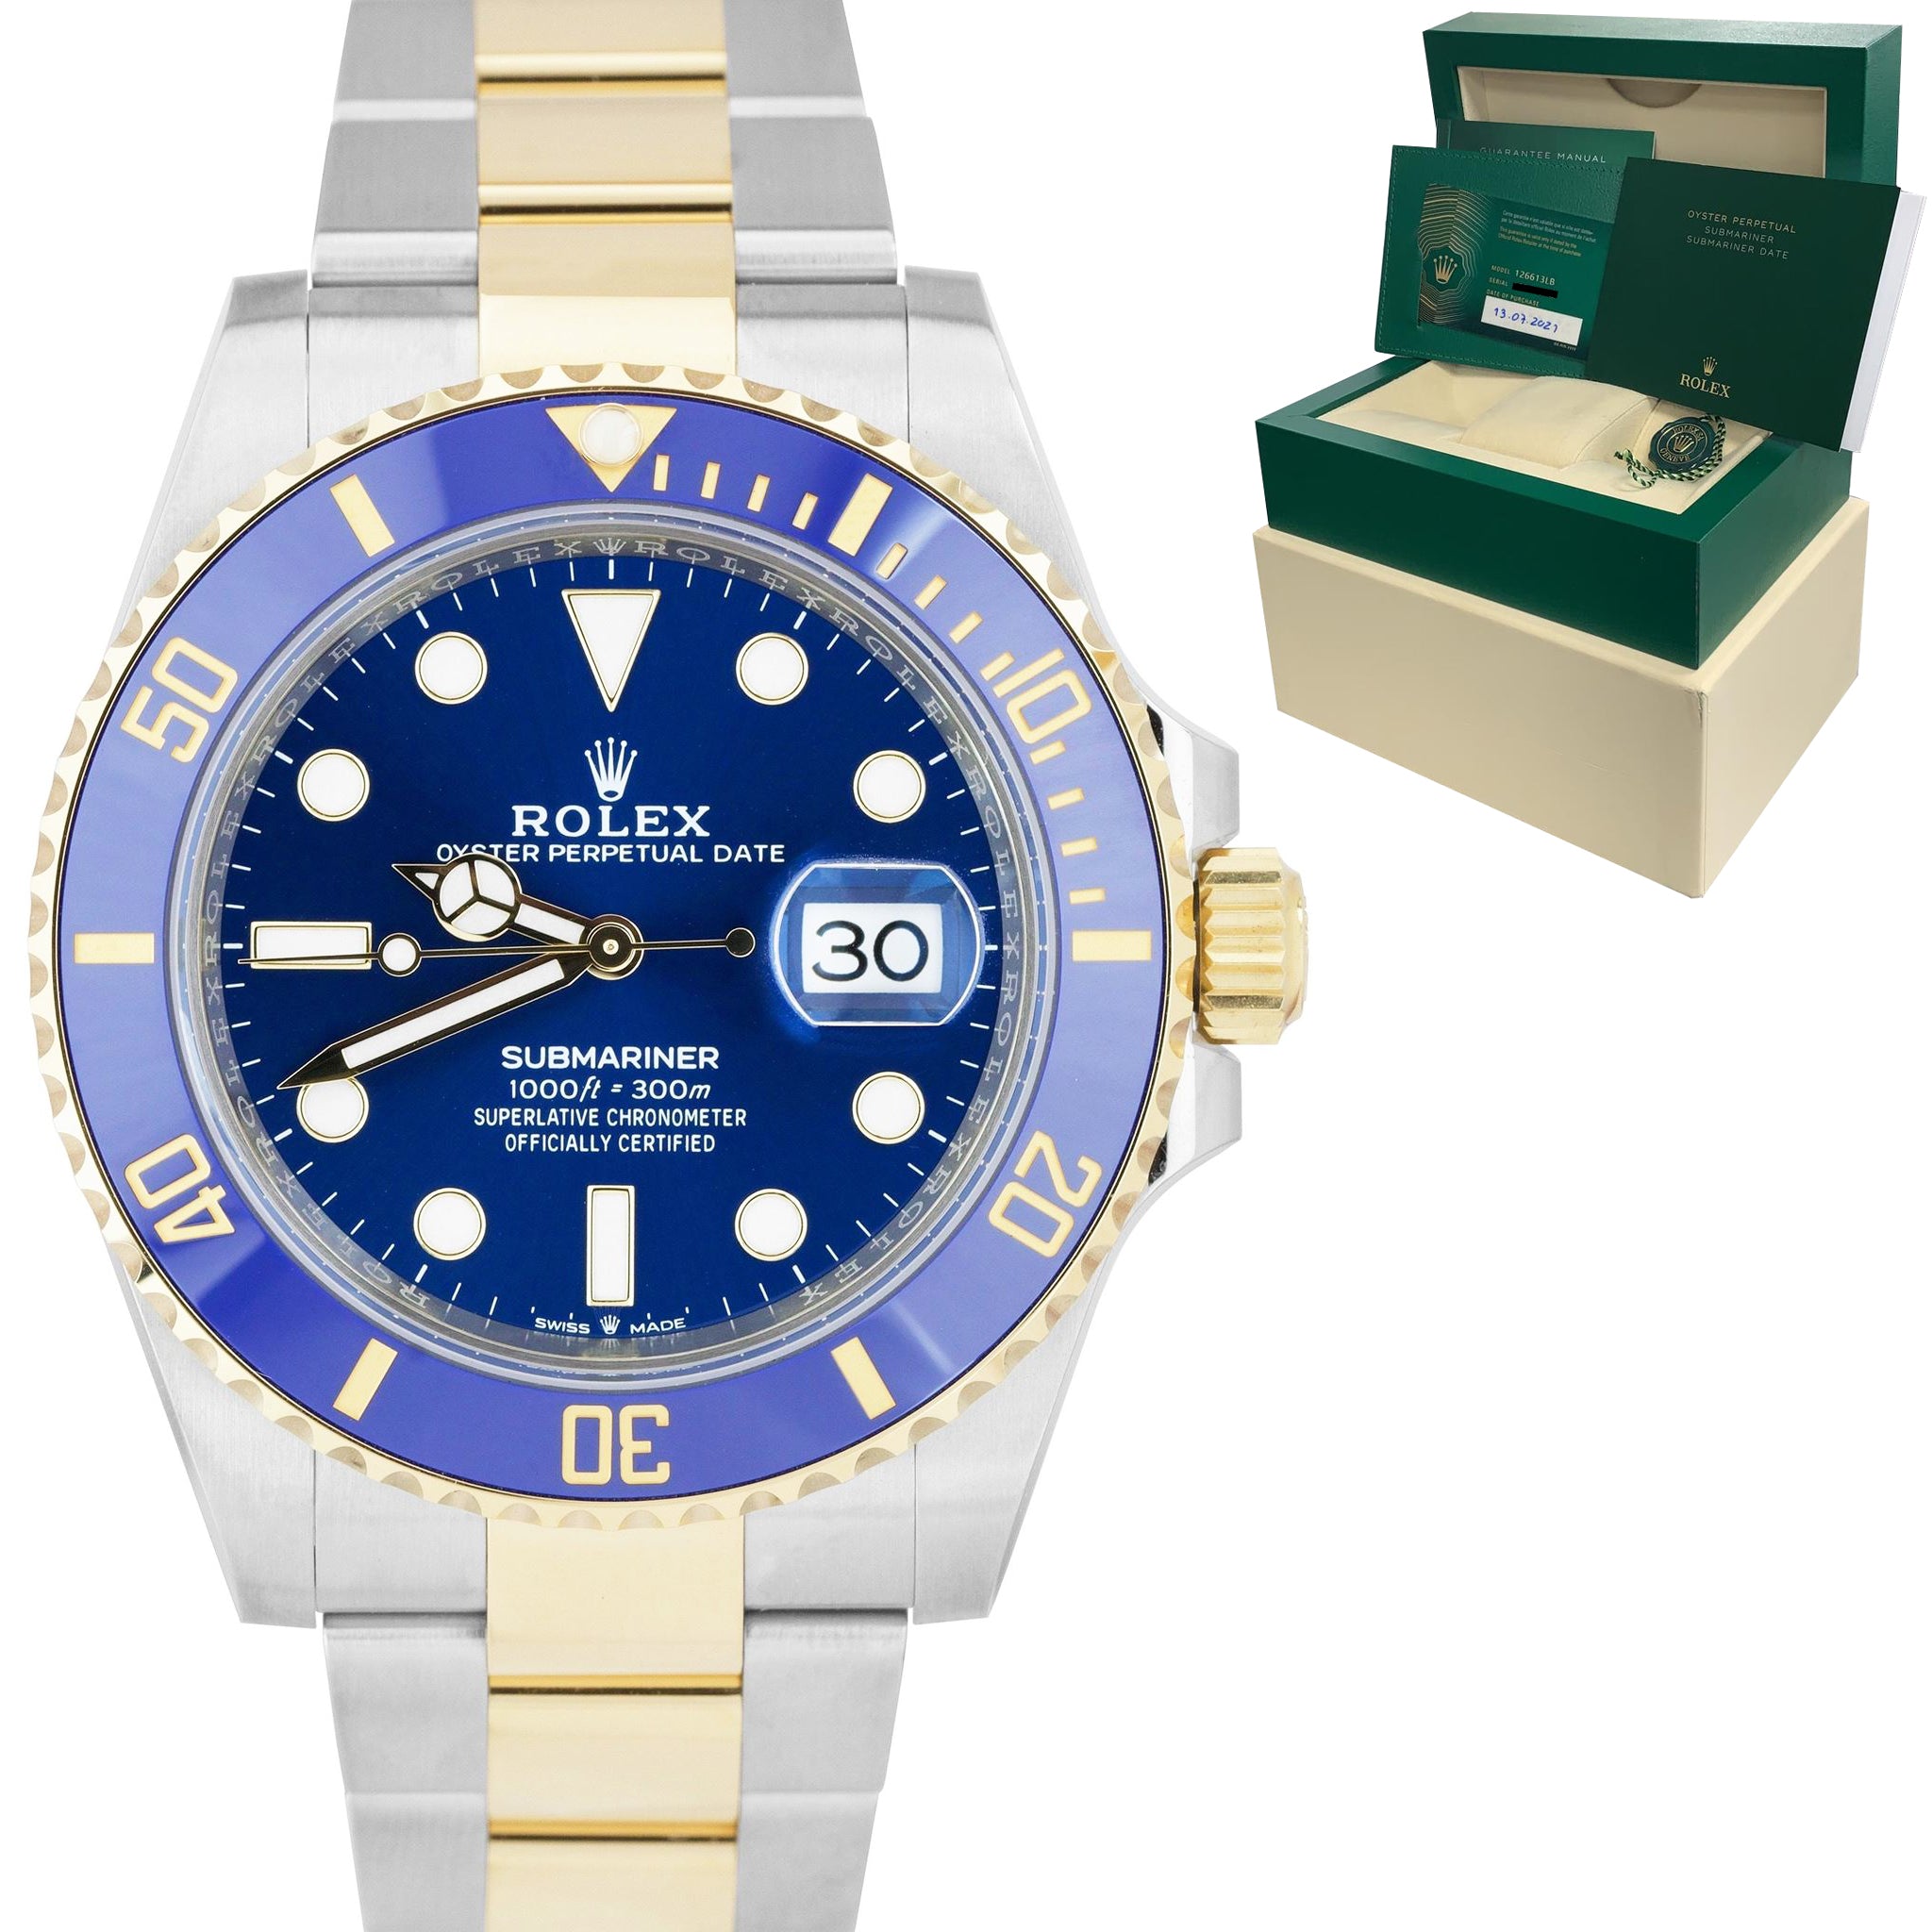 NEW 2021 Rolex Submariner Date 41mm Ceramic Two-Tone Gold Blue Watch 126613 LB